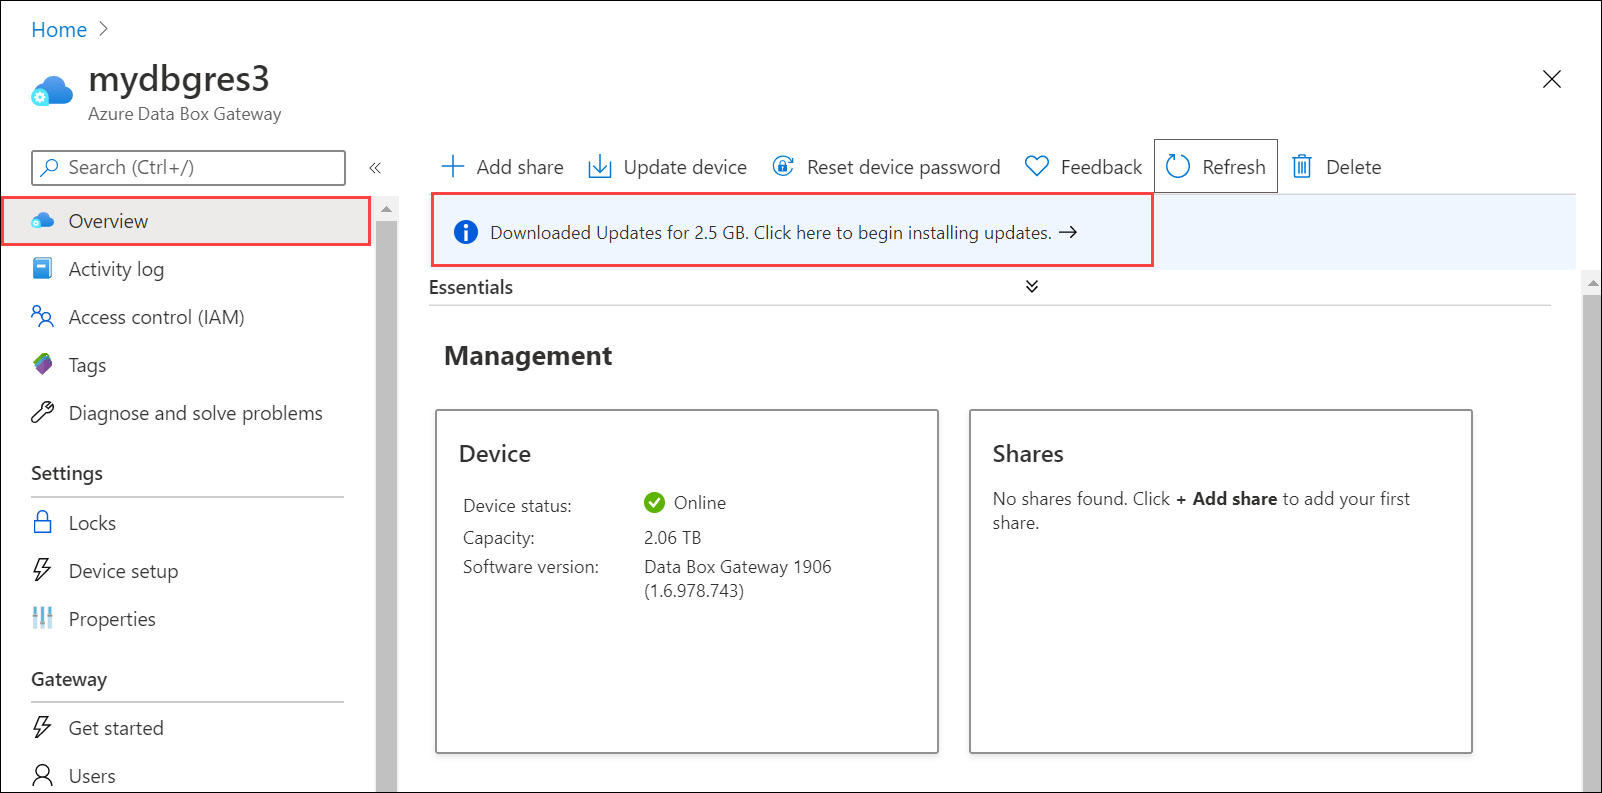 Screenshot of the Azure Data Box Gateway Home page with the Overview option and the Downloaded Updates notification banner called out.